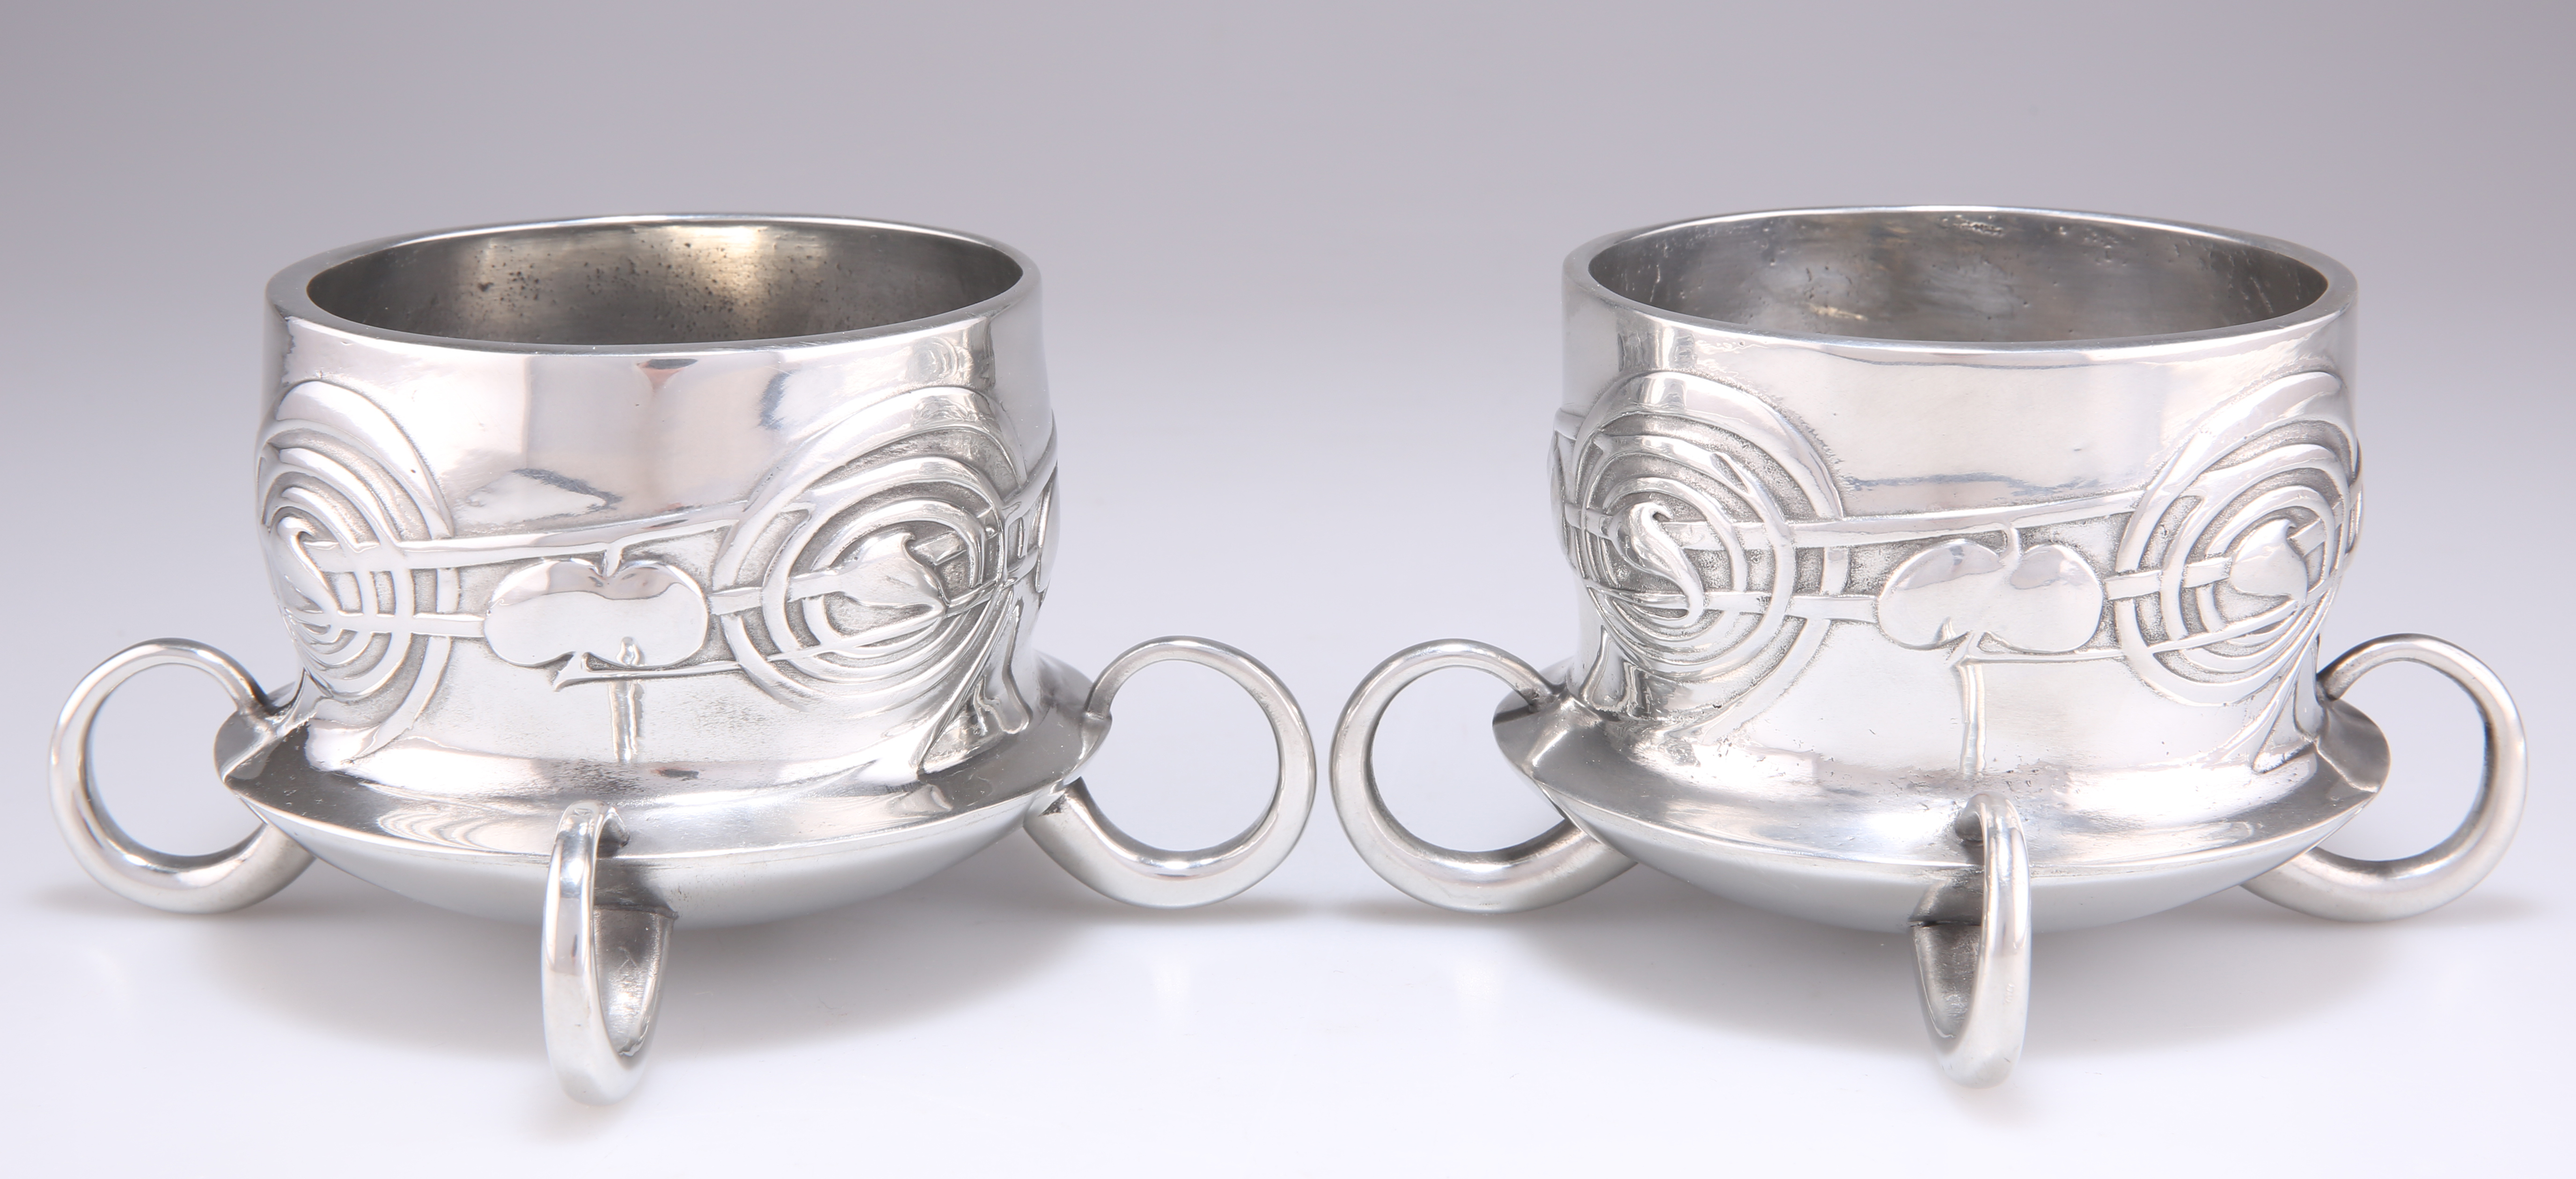 ARCHIBALD KNOX (1864-1933) FOR LIBERTY & CO, A PAIR OF TUDRIC PEWTER FERNER BOWLS, NO.0288